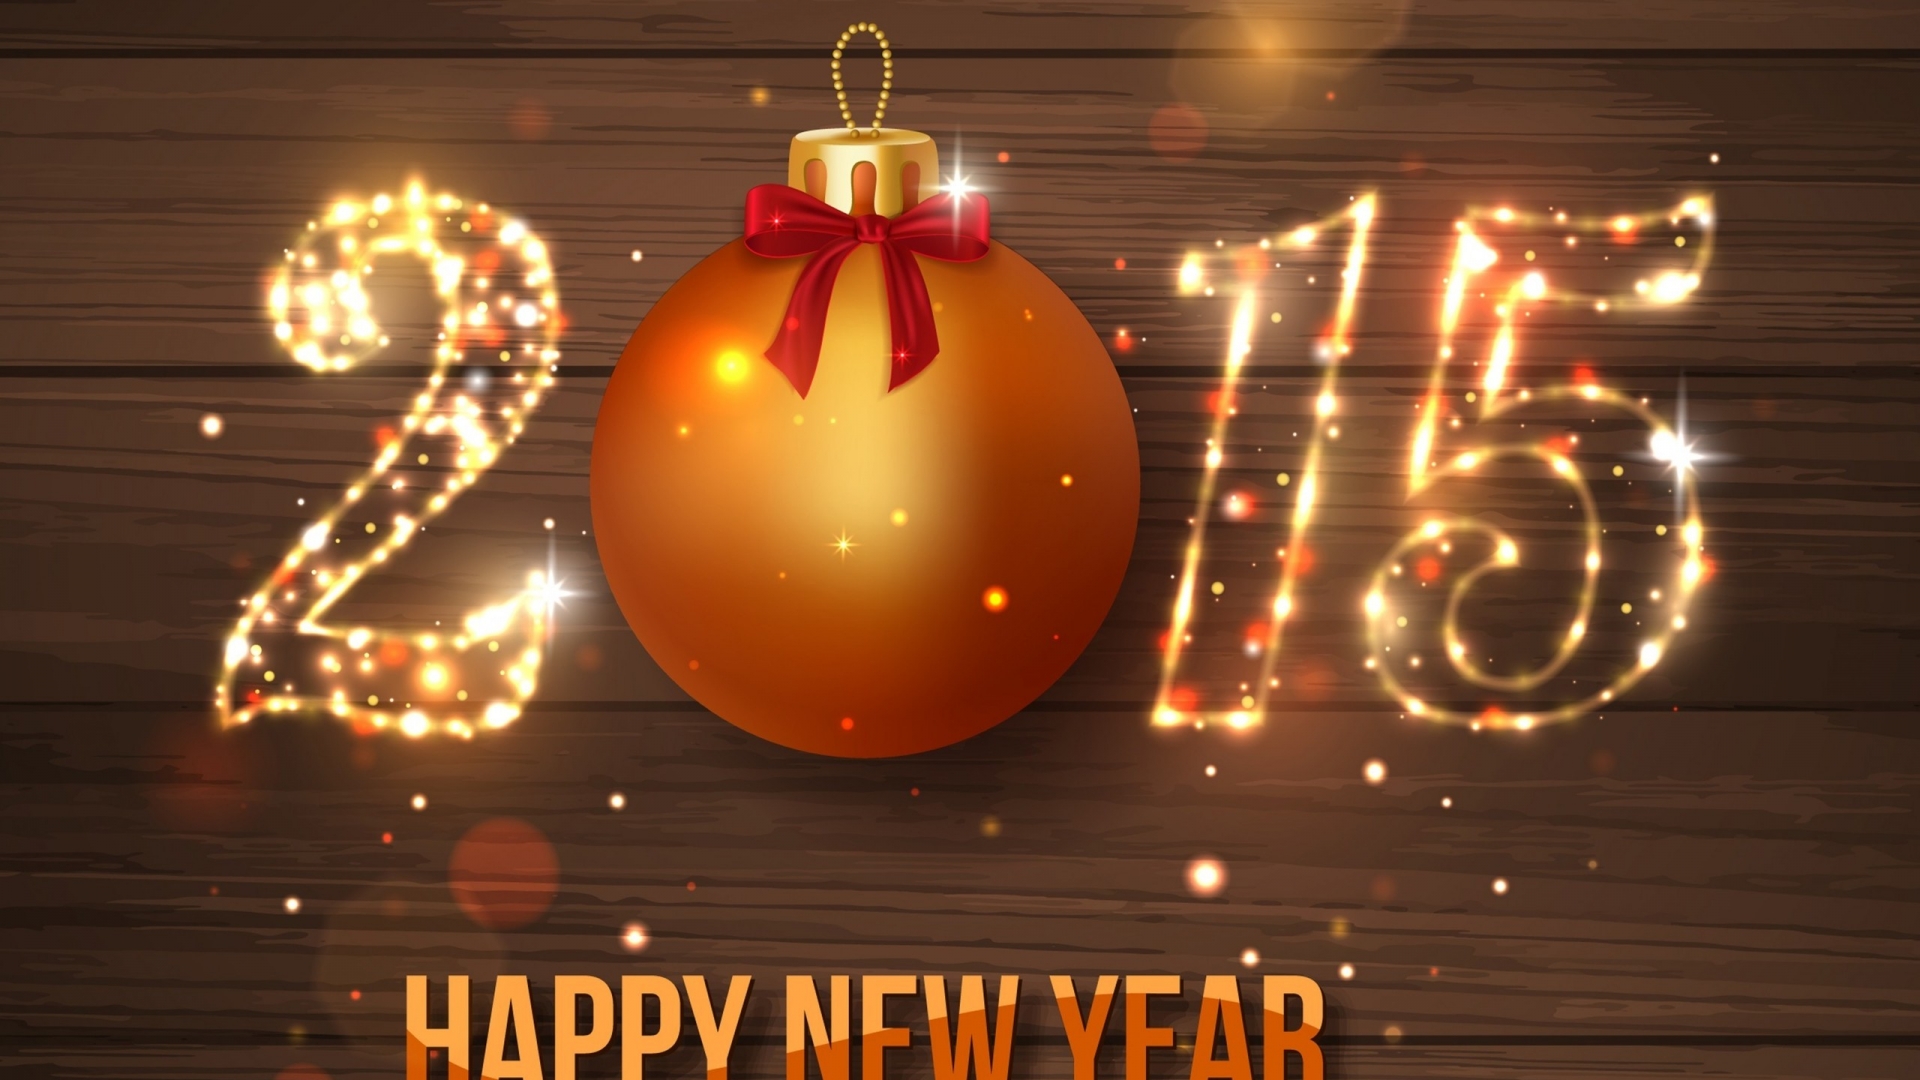 2015 Happy New Year for 1920 x 1080 HDTV 1080p resolution